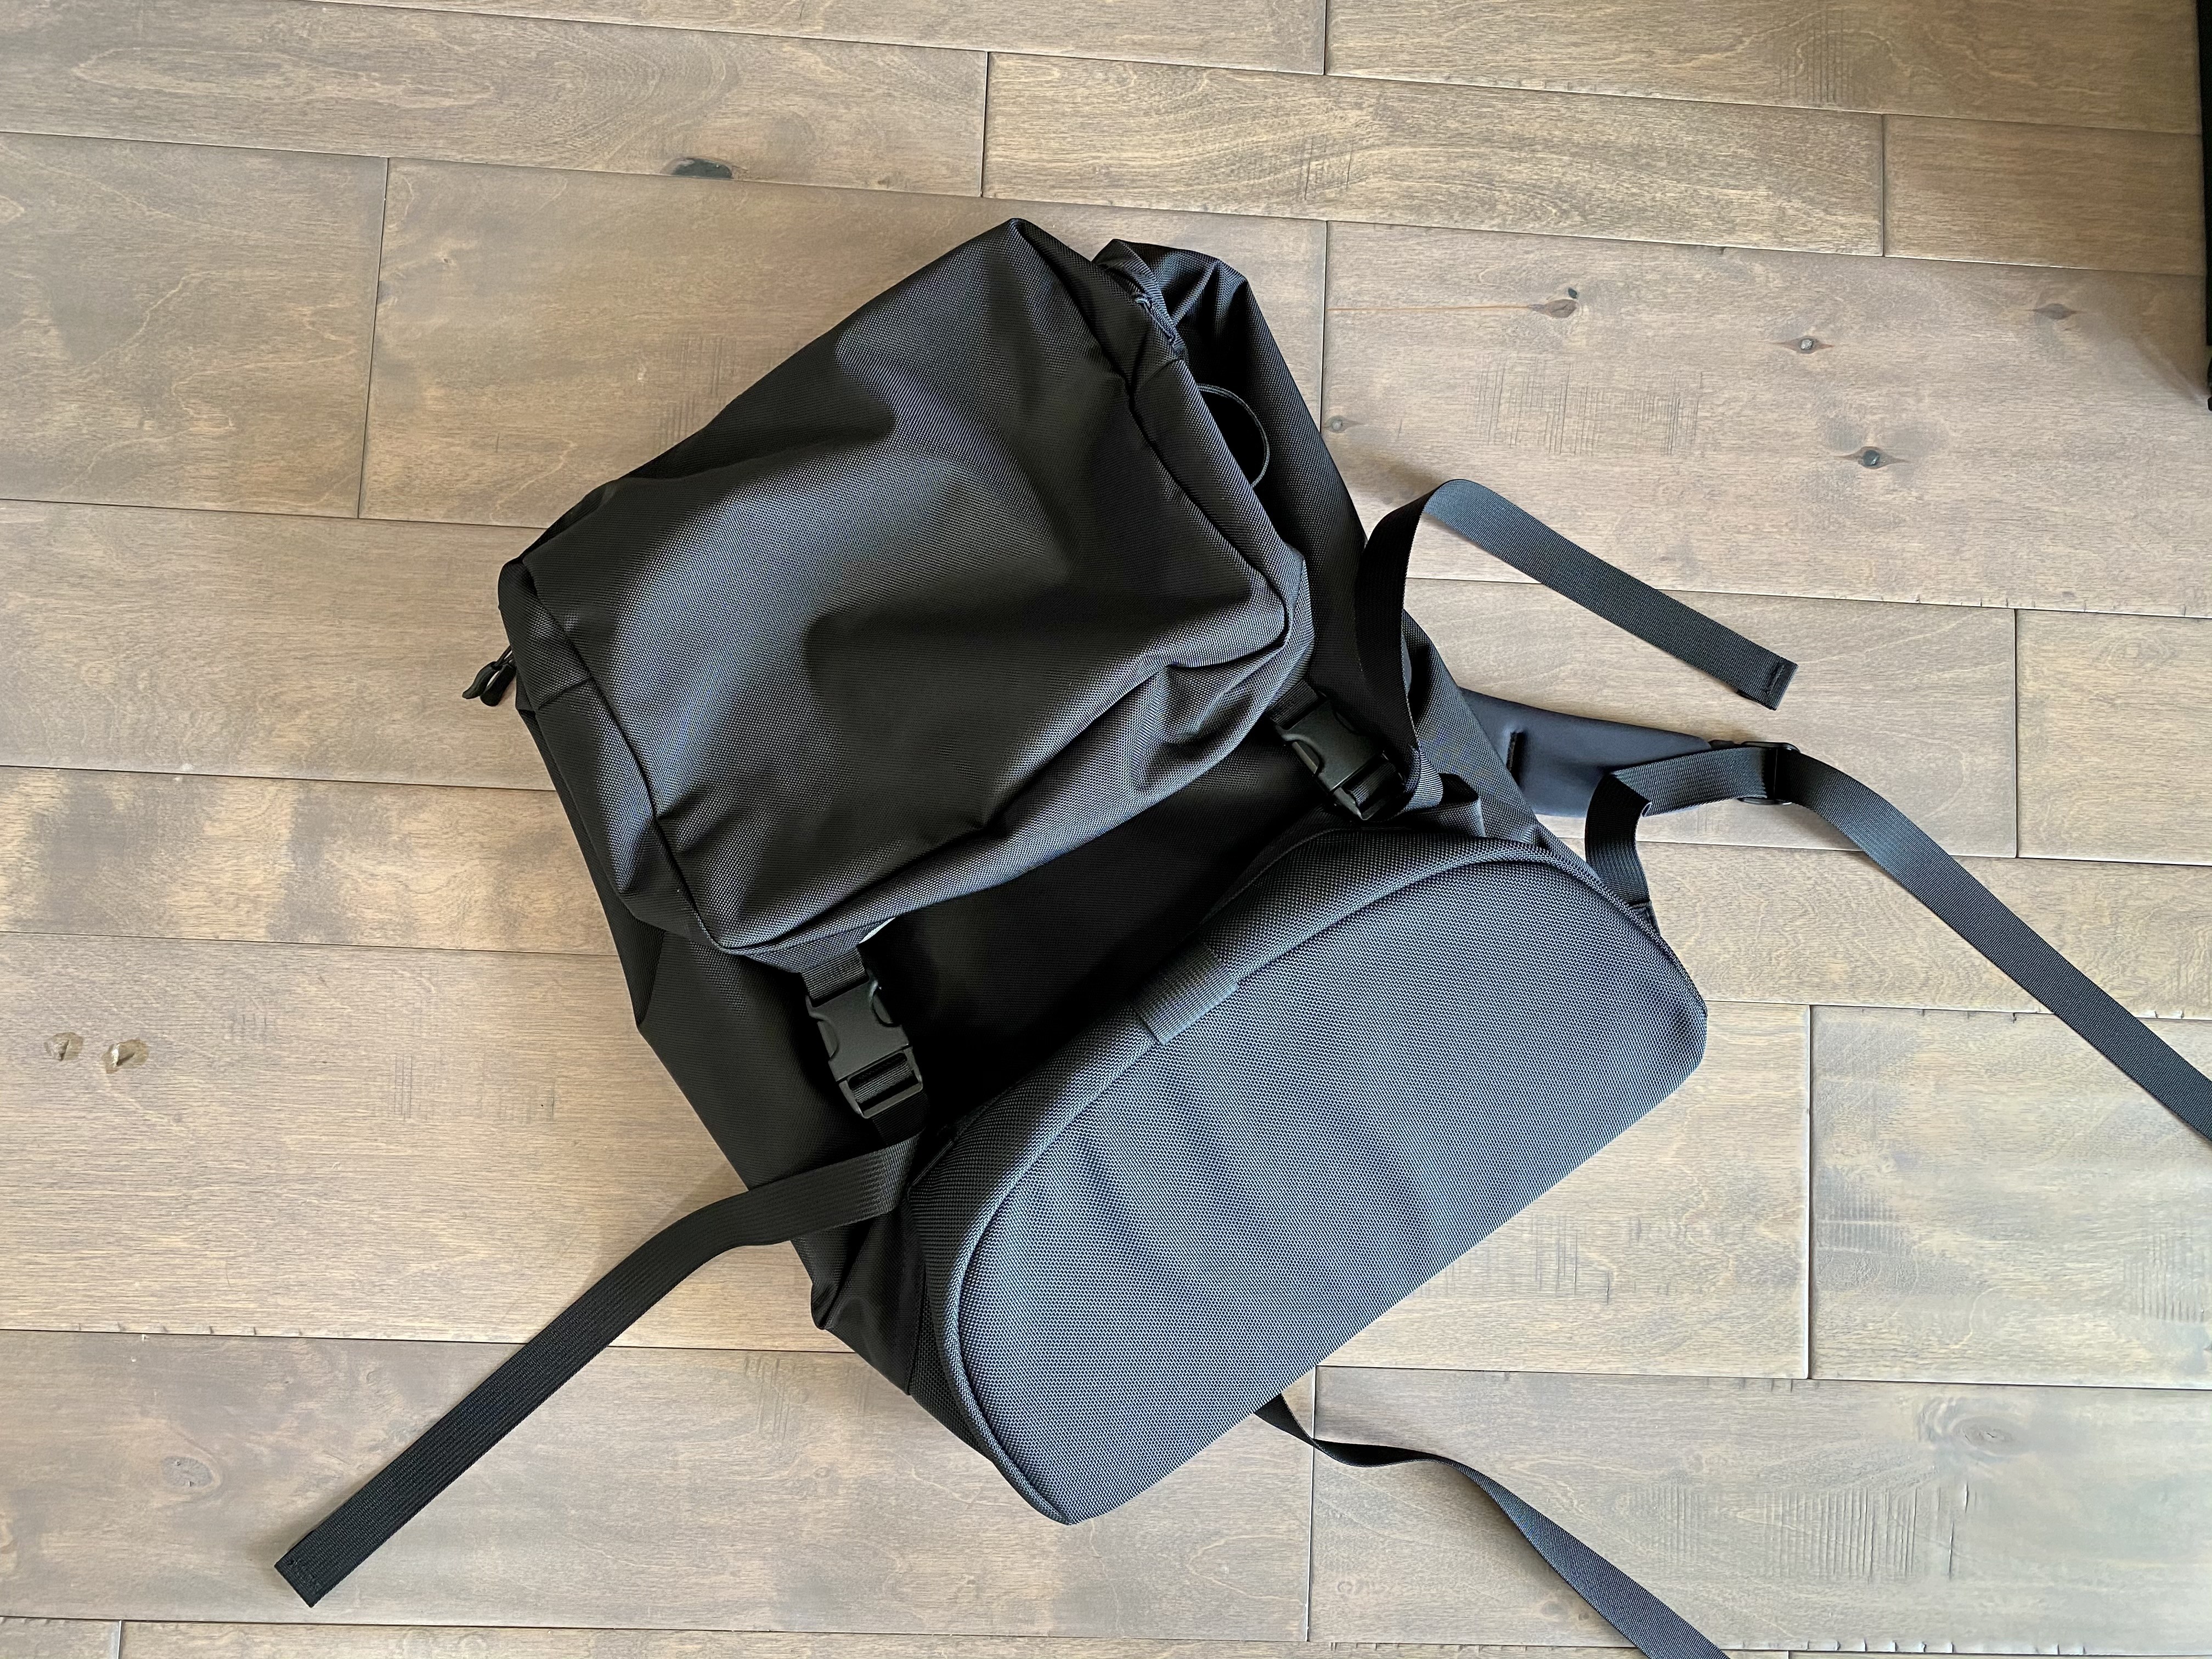 First Look: Tom Bihn Shadow Guide V2 33 Backpack – The Brooks Review